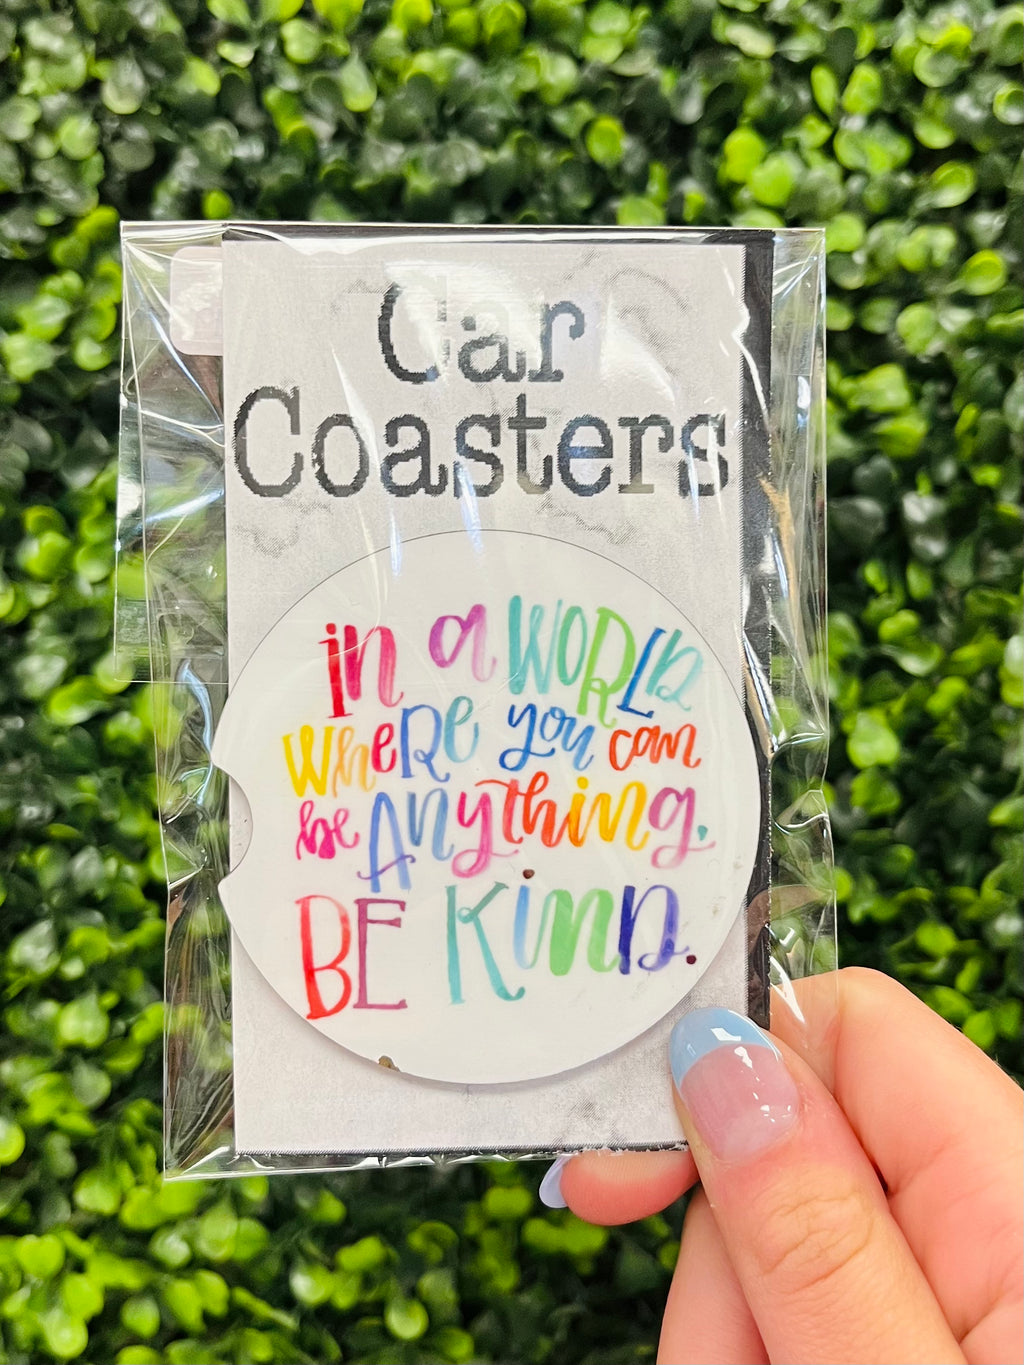 Give that special someone an inspiring gift with our "In A World" Car Coaster! With its colorful cursive font and motivational message, it'll be a daily reminder to "be kind" no matter where the road takes them! It's the perfect way to brighten up any car interior (or their day!).